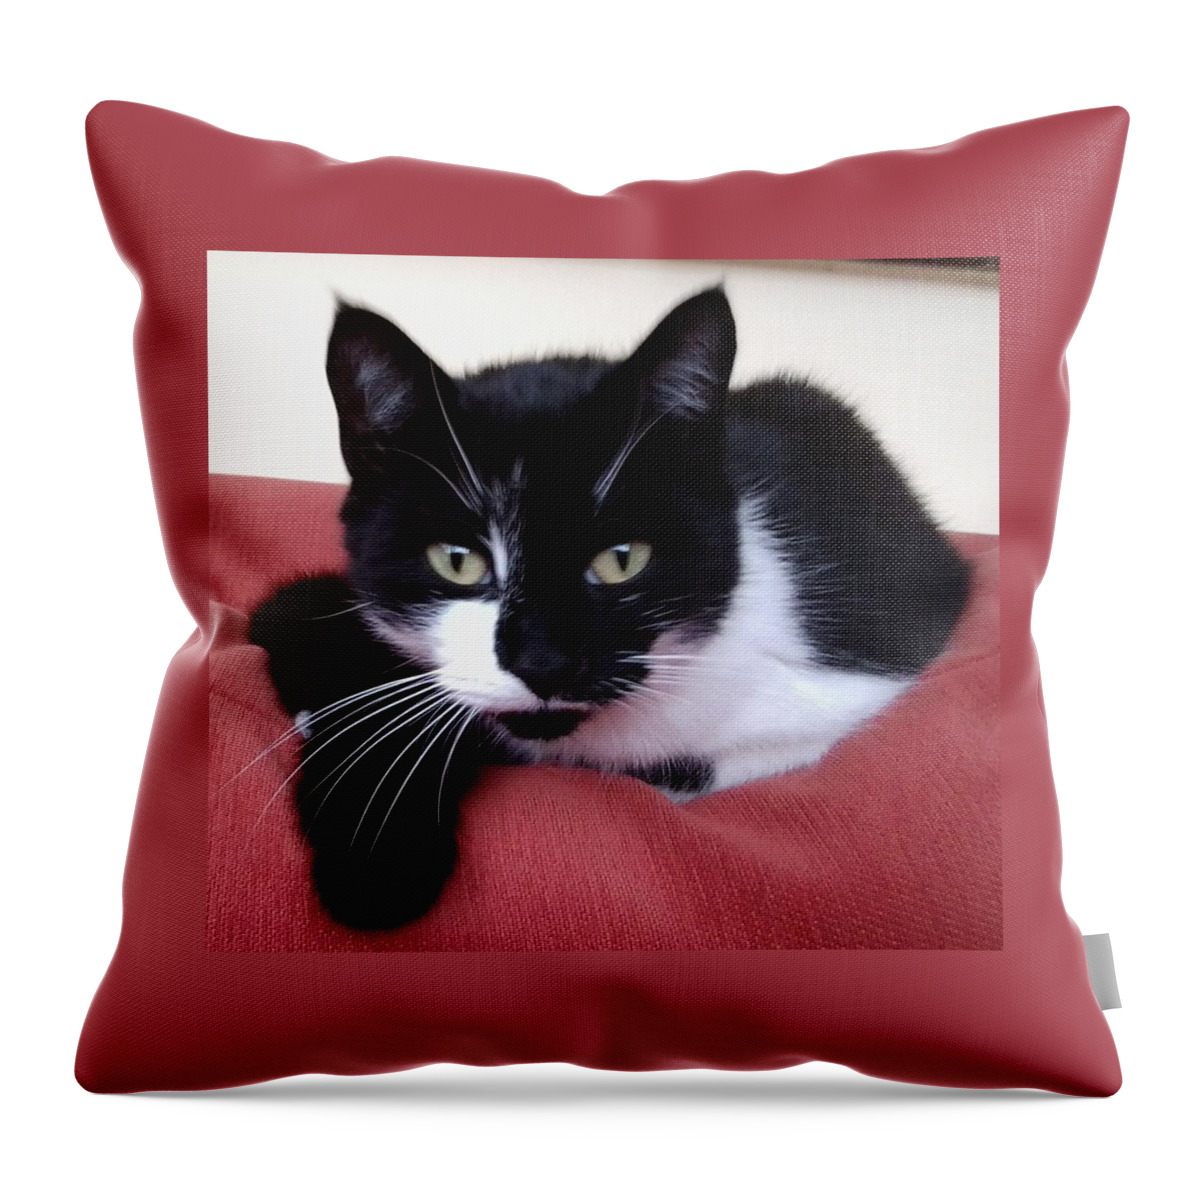 Cat Throw Pillow featuring the photograph Cute Cat by Julia Woodman